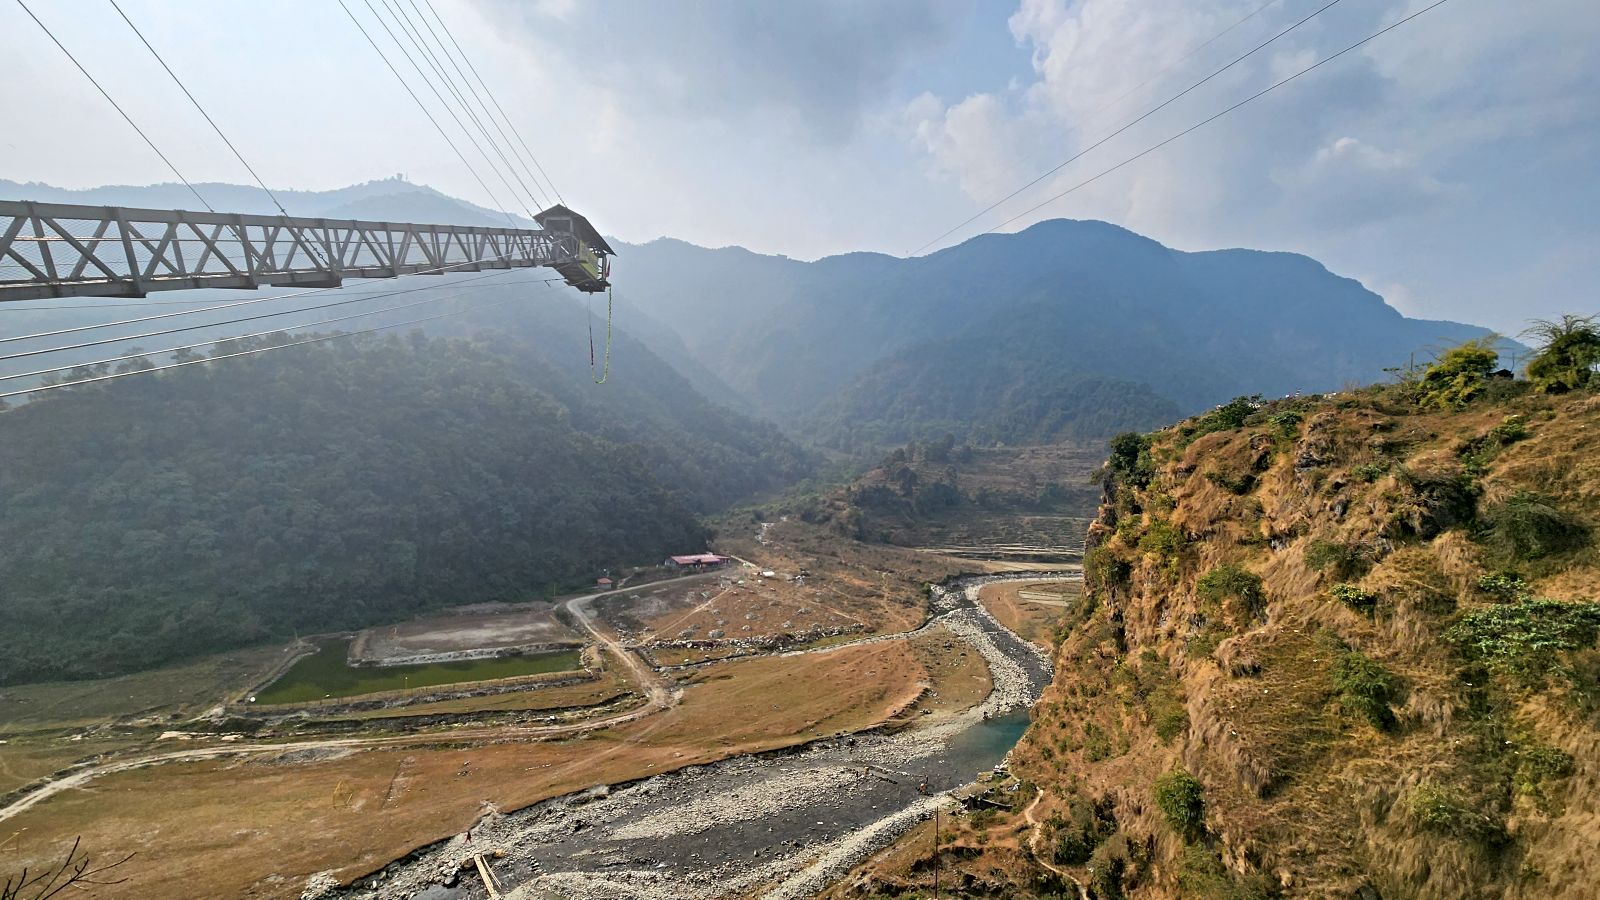 Bungy jump in Pokhara, Nepal